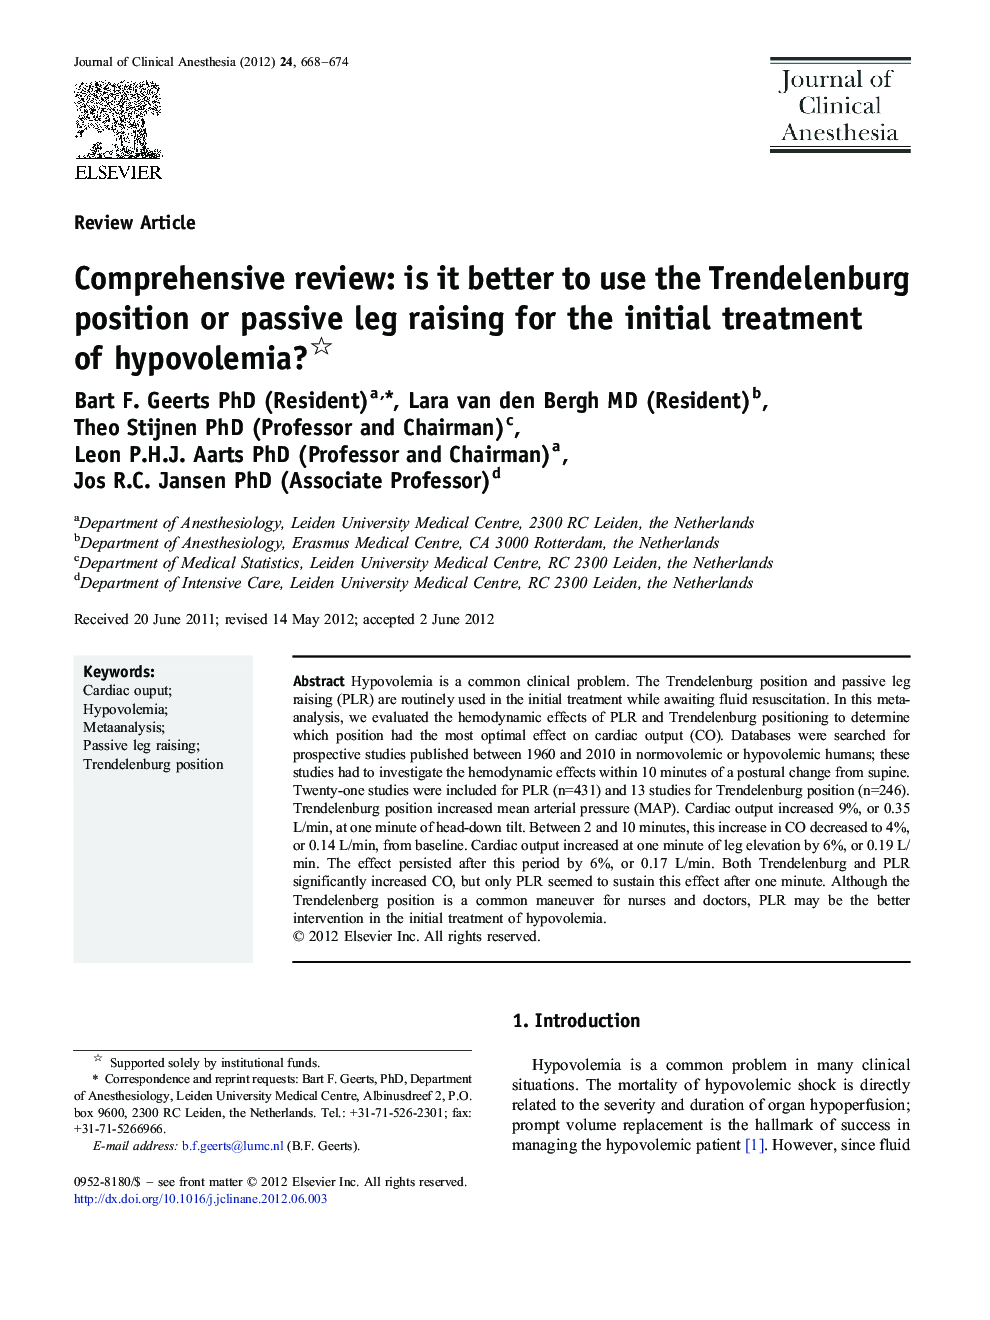 Comprehensive review: is it better to use the Trendelenburg position or passive leg raising for the initial treatment of hypovolemia? 